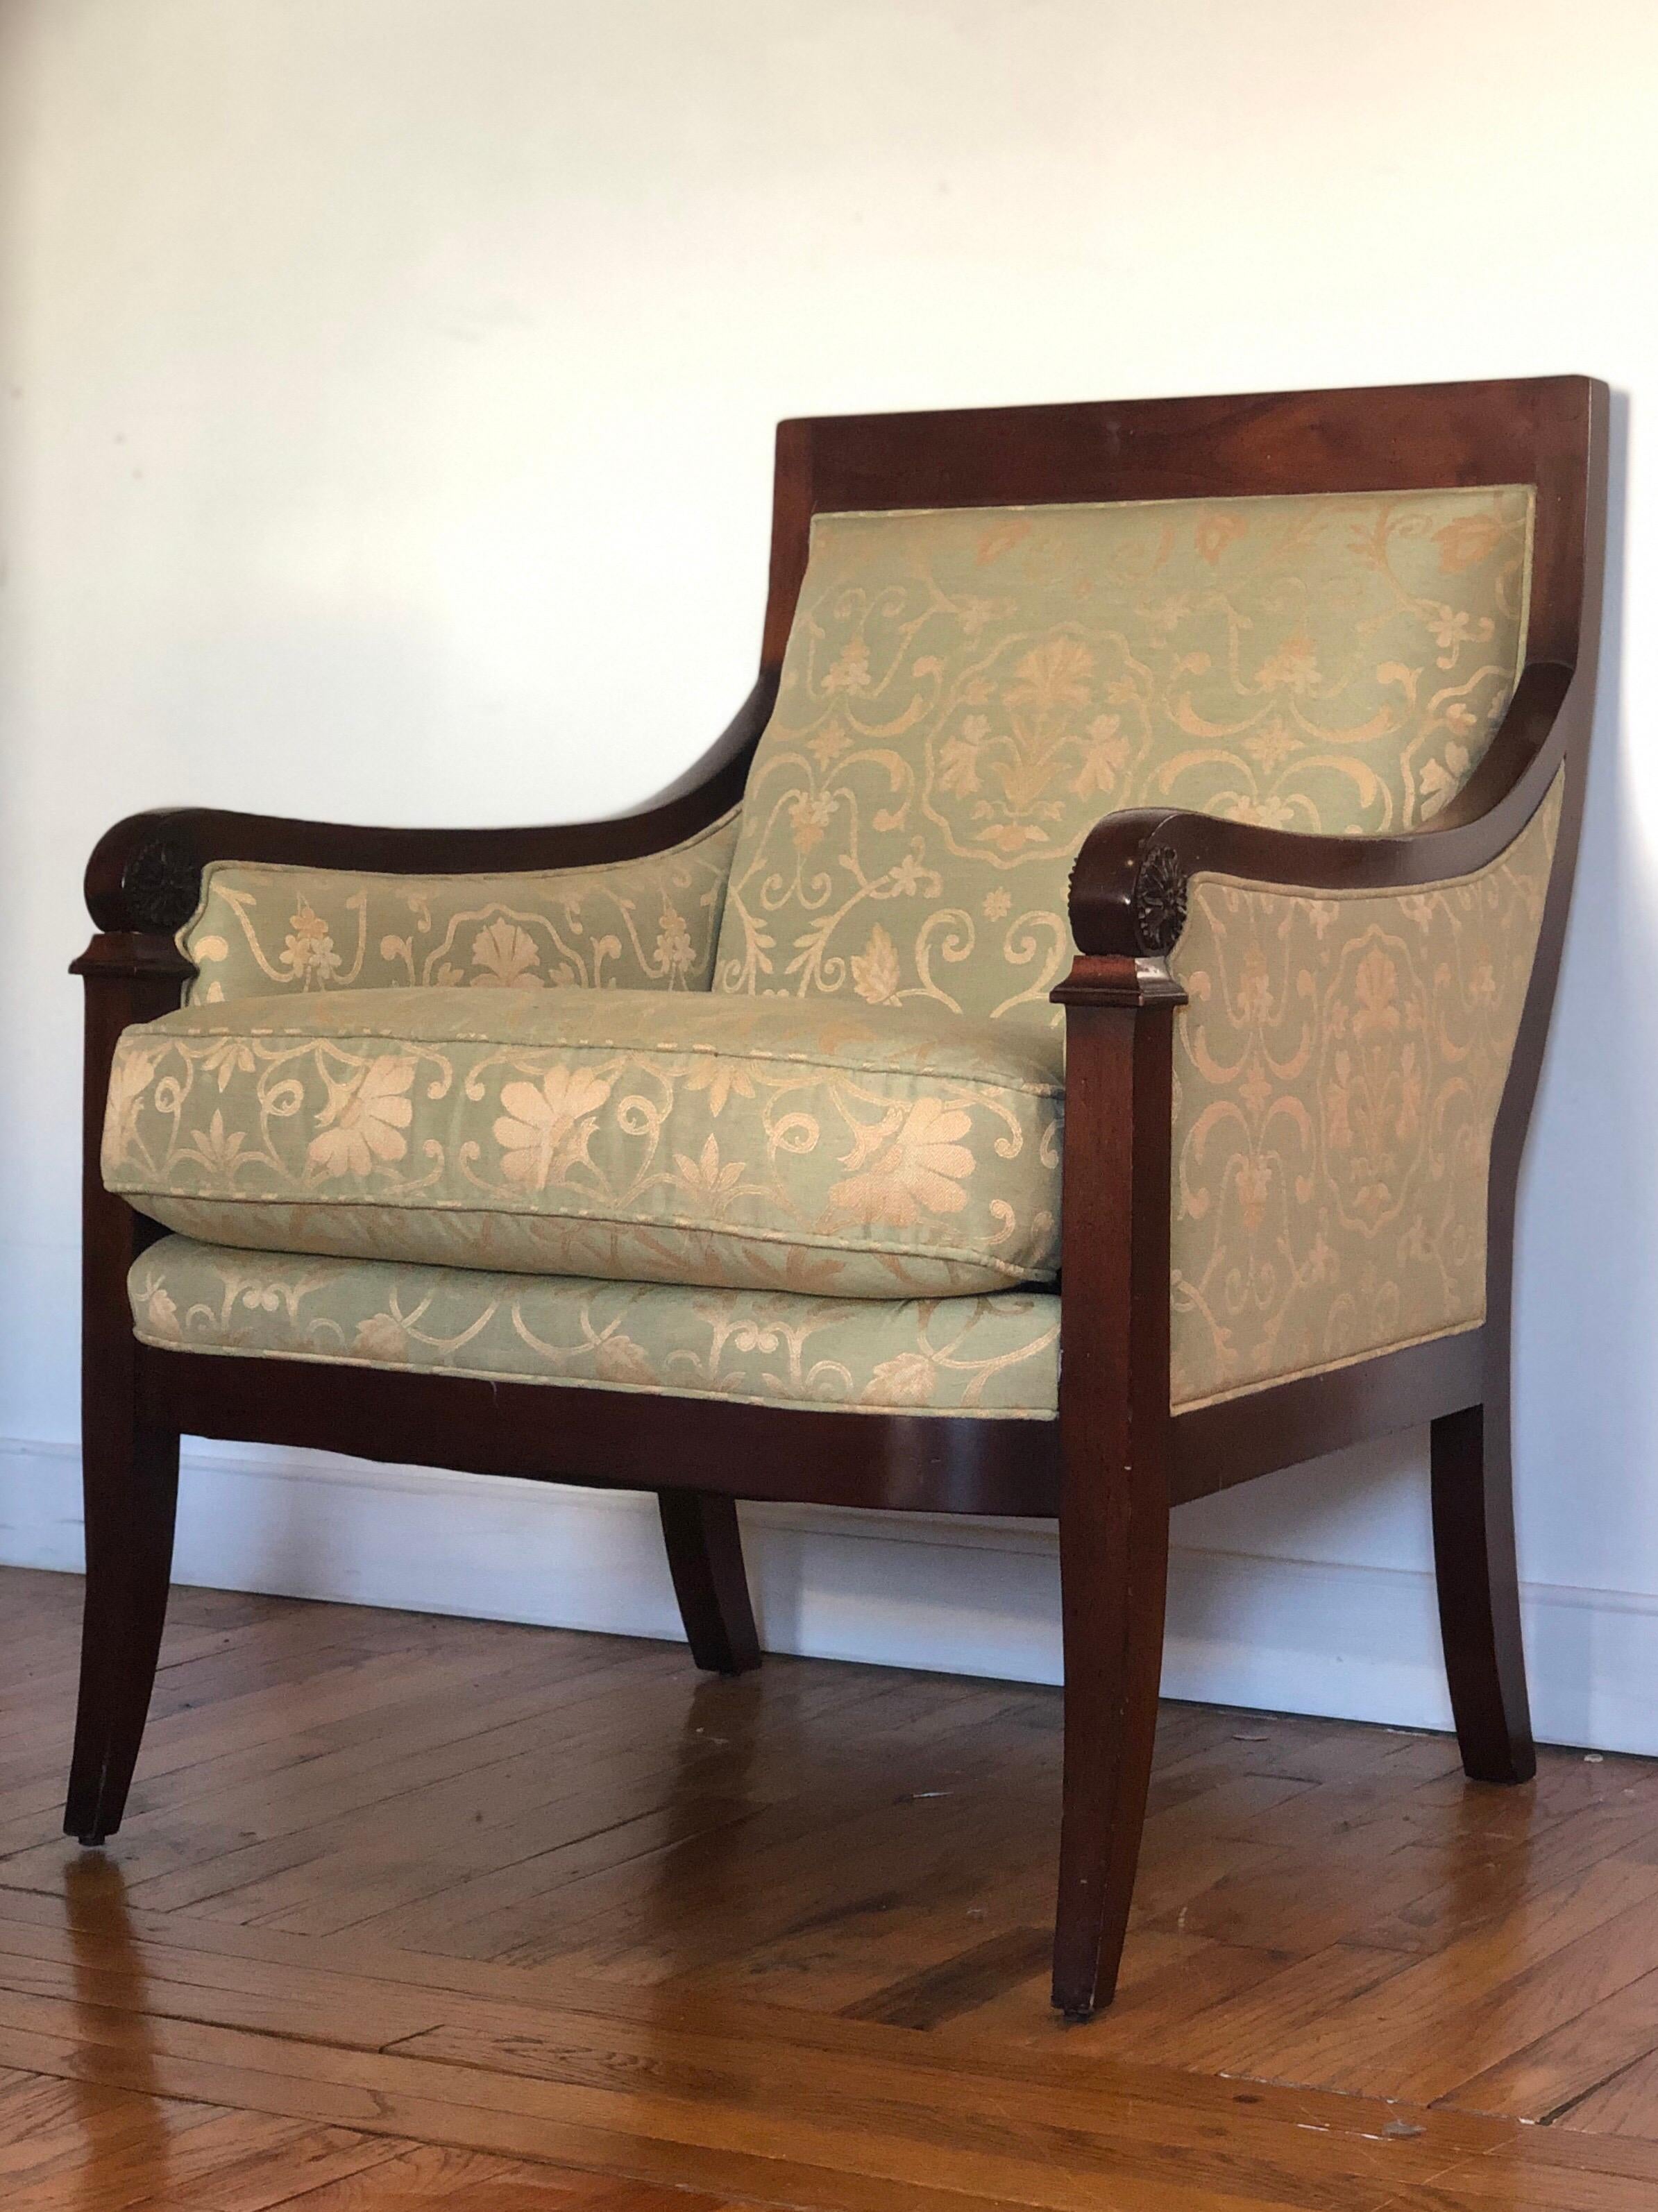 Stunning lines, immensely comfortable. Custom textile. 4500 USD retail per chair. Don't miss this. Timeless design. 
Vintage Beech Baker Milling Road Originals French Restauration Armchair, Silk (?) textile 

Gracefully shaped back and arms. Saber